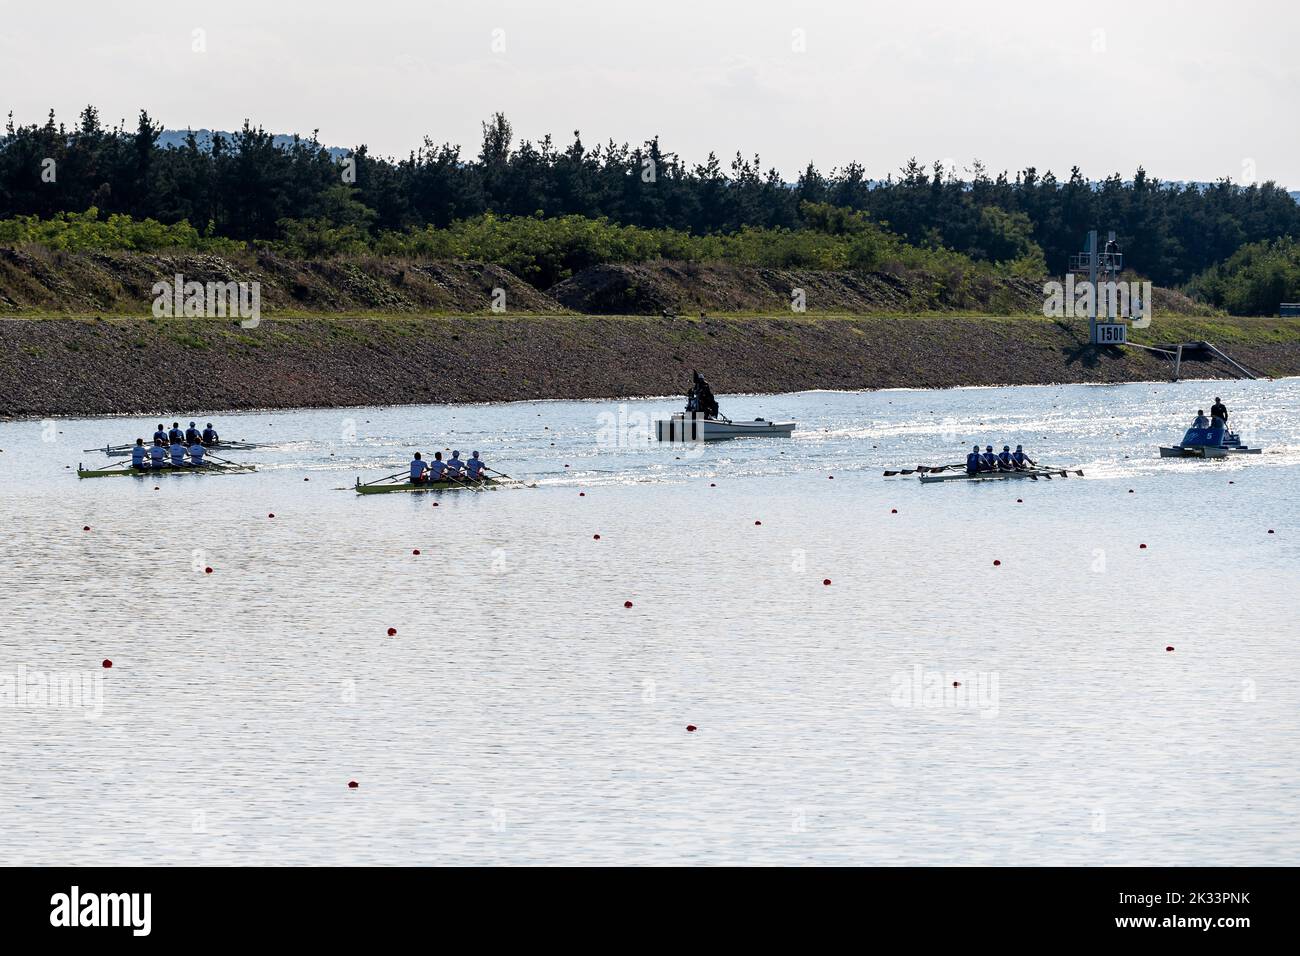 Racice, Czech Republic. 24th Sep, 2022. The Men's Quadruple Sculls Final during Day 7 of the 2022 World Rowing Championships at the Labe Arena Racice on September 24, 2022 in Racice, Czech Republic. Credit: Ondrej Hajek/CTK Photo/Alamy Live News Stock Photo